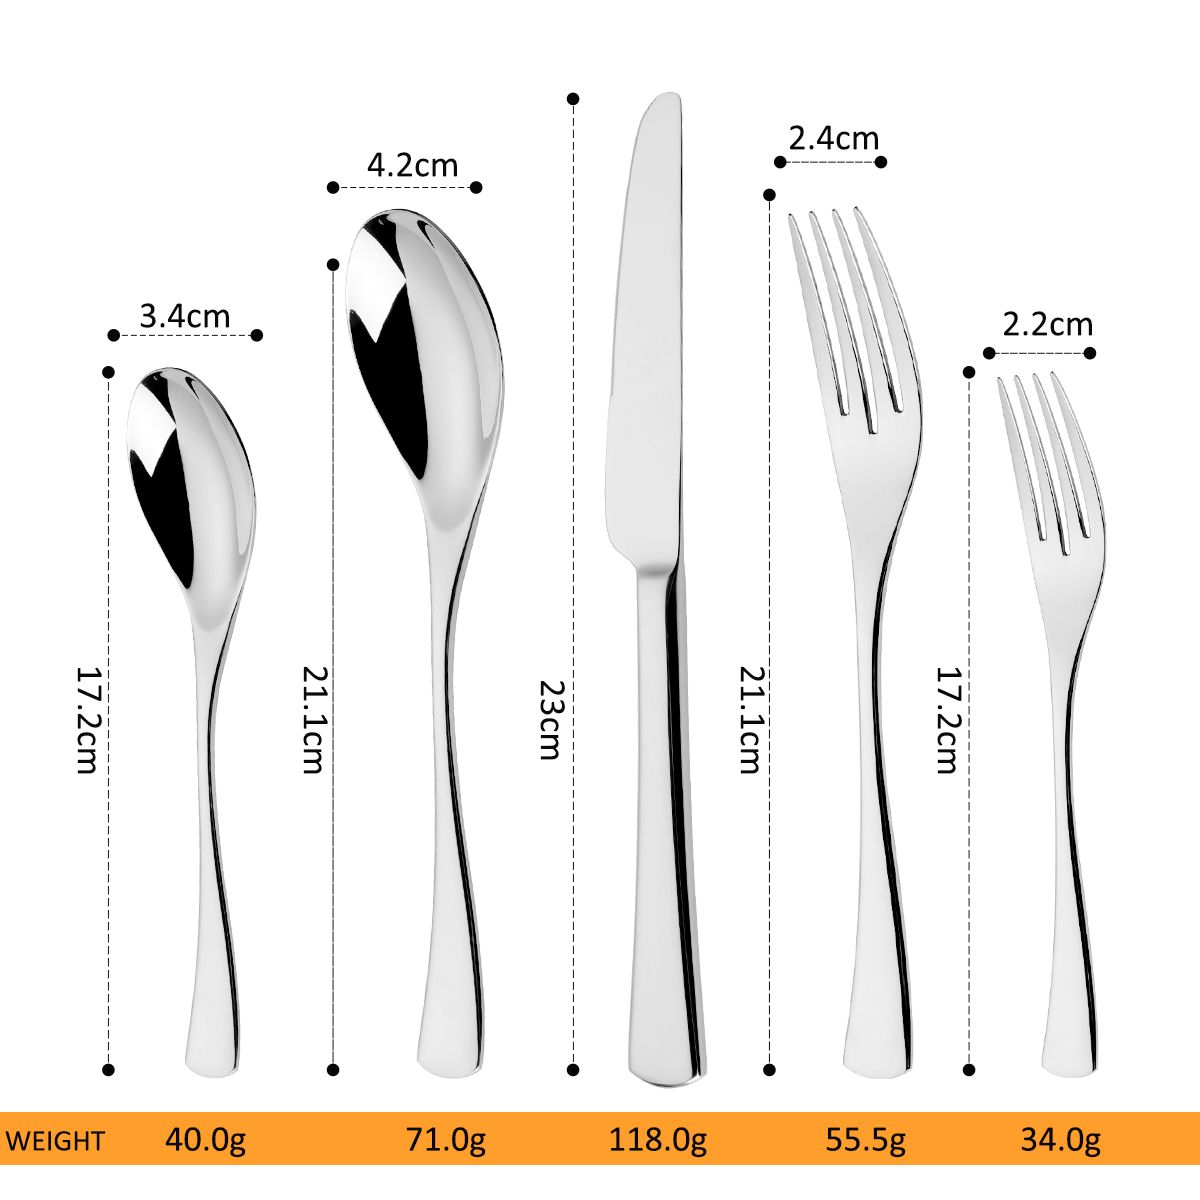 Silverplate Flatware Manufacturers Us Cutlery Wallace Wholesale Sets International China Gold Plated Silverware